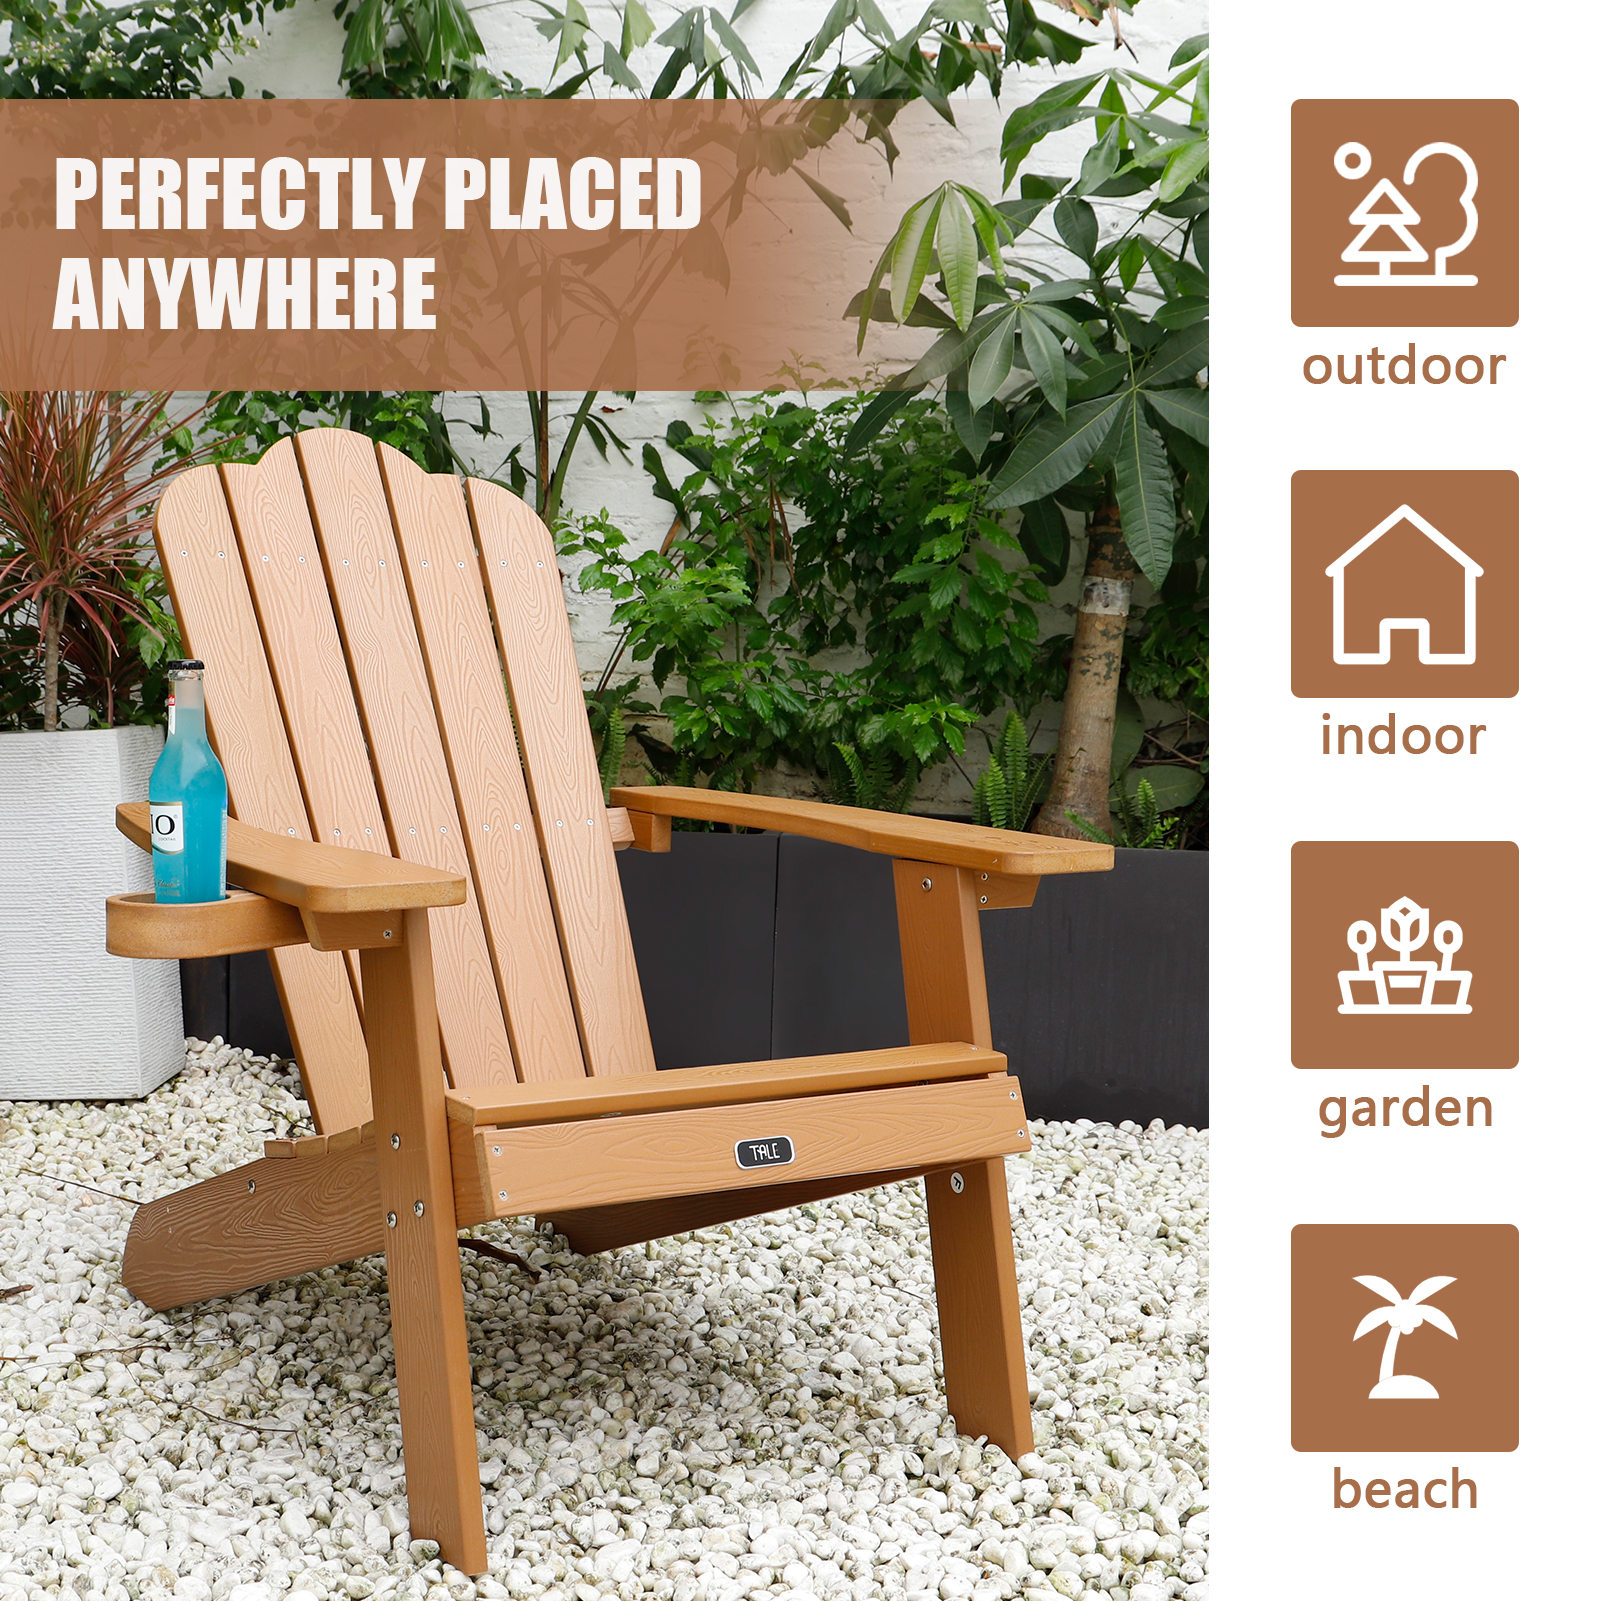 Sportaza Chair Backyard Outdoor Furniture Painted Seating with Cup Holder All-Weather and Fade-Resistant Plastic Wood for Lawn Patio Deck Garden Porch Lawn Furniture Chairs Brown - image 2 of 7